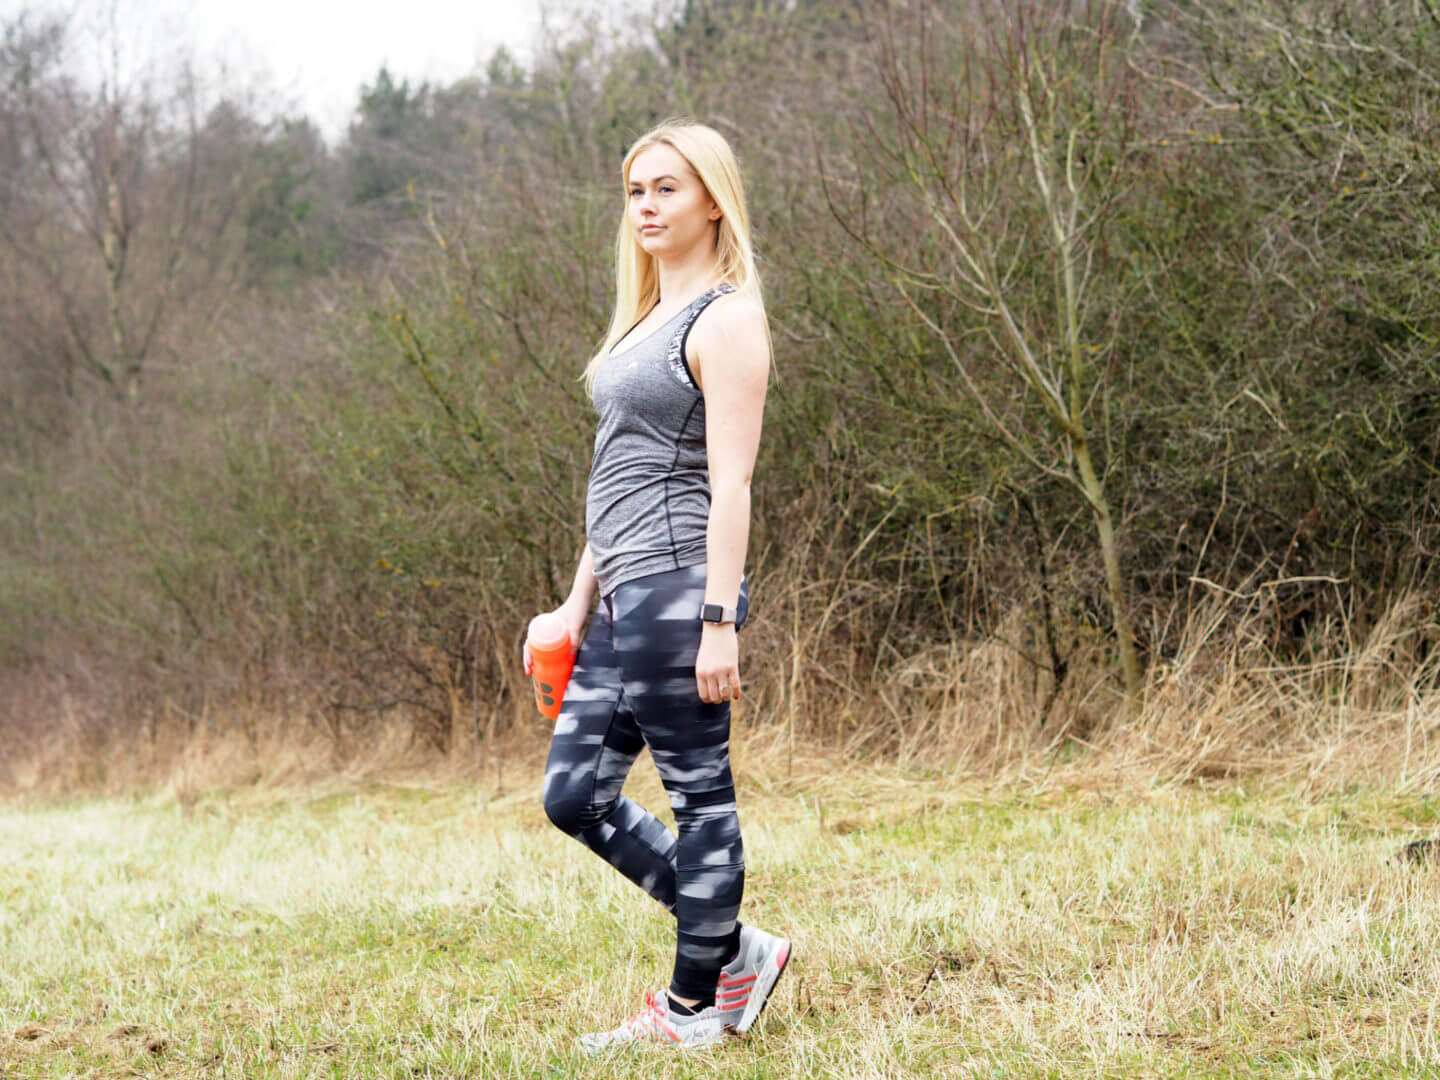 Tesco F&F Clothing launches comfy activewear range perfect for the